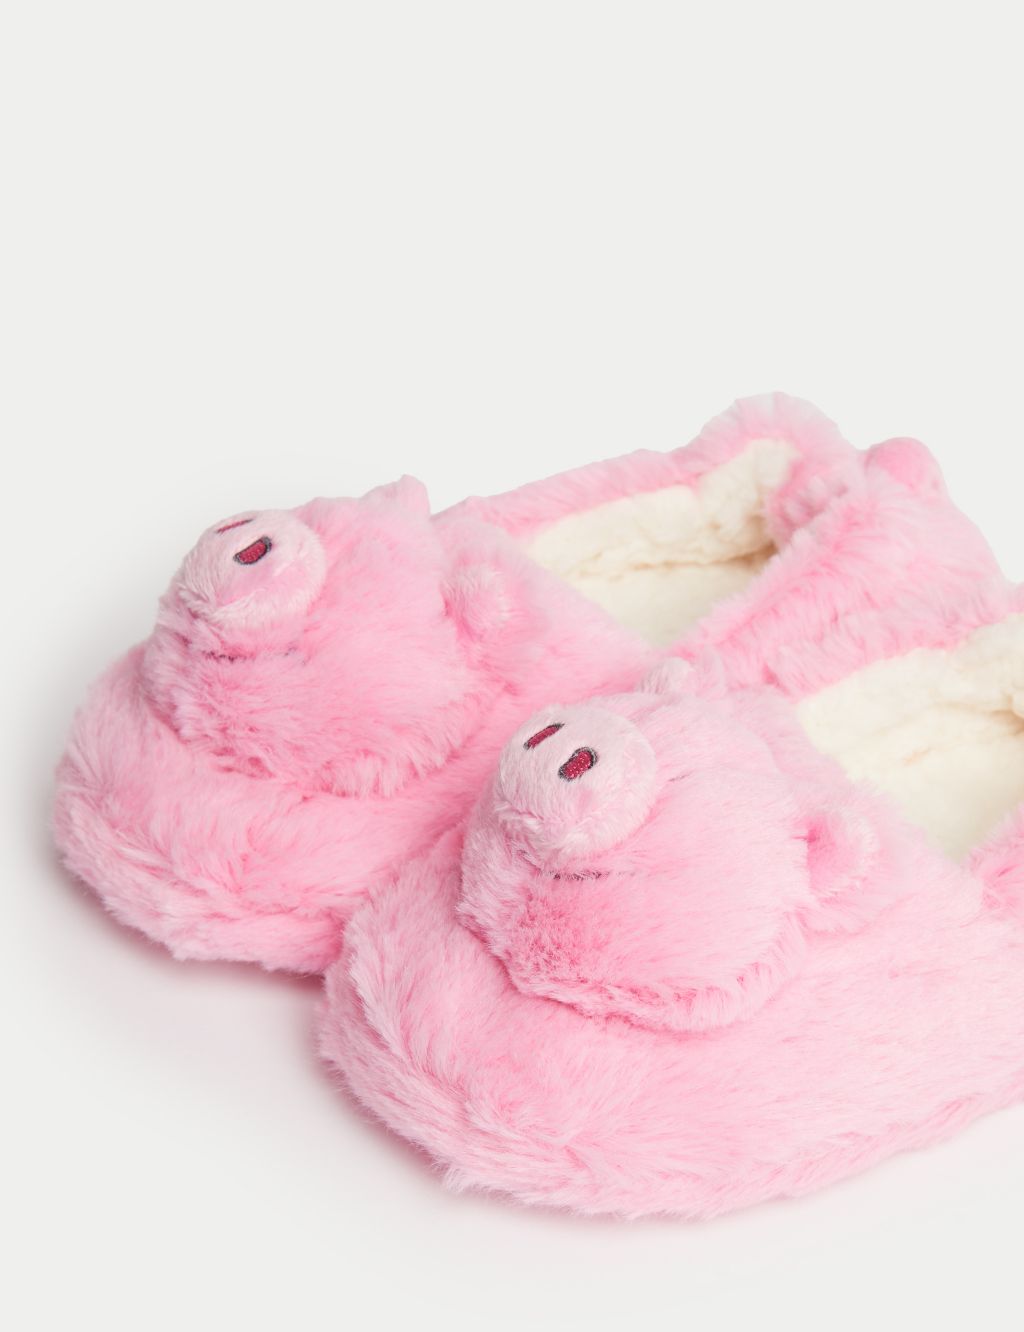 Kids' Percy Pig™ Slippers (5 Small - 6 Large) image 2